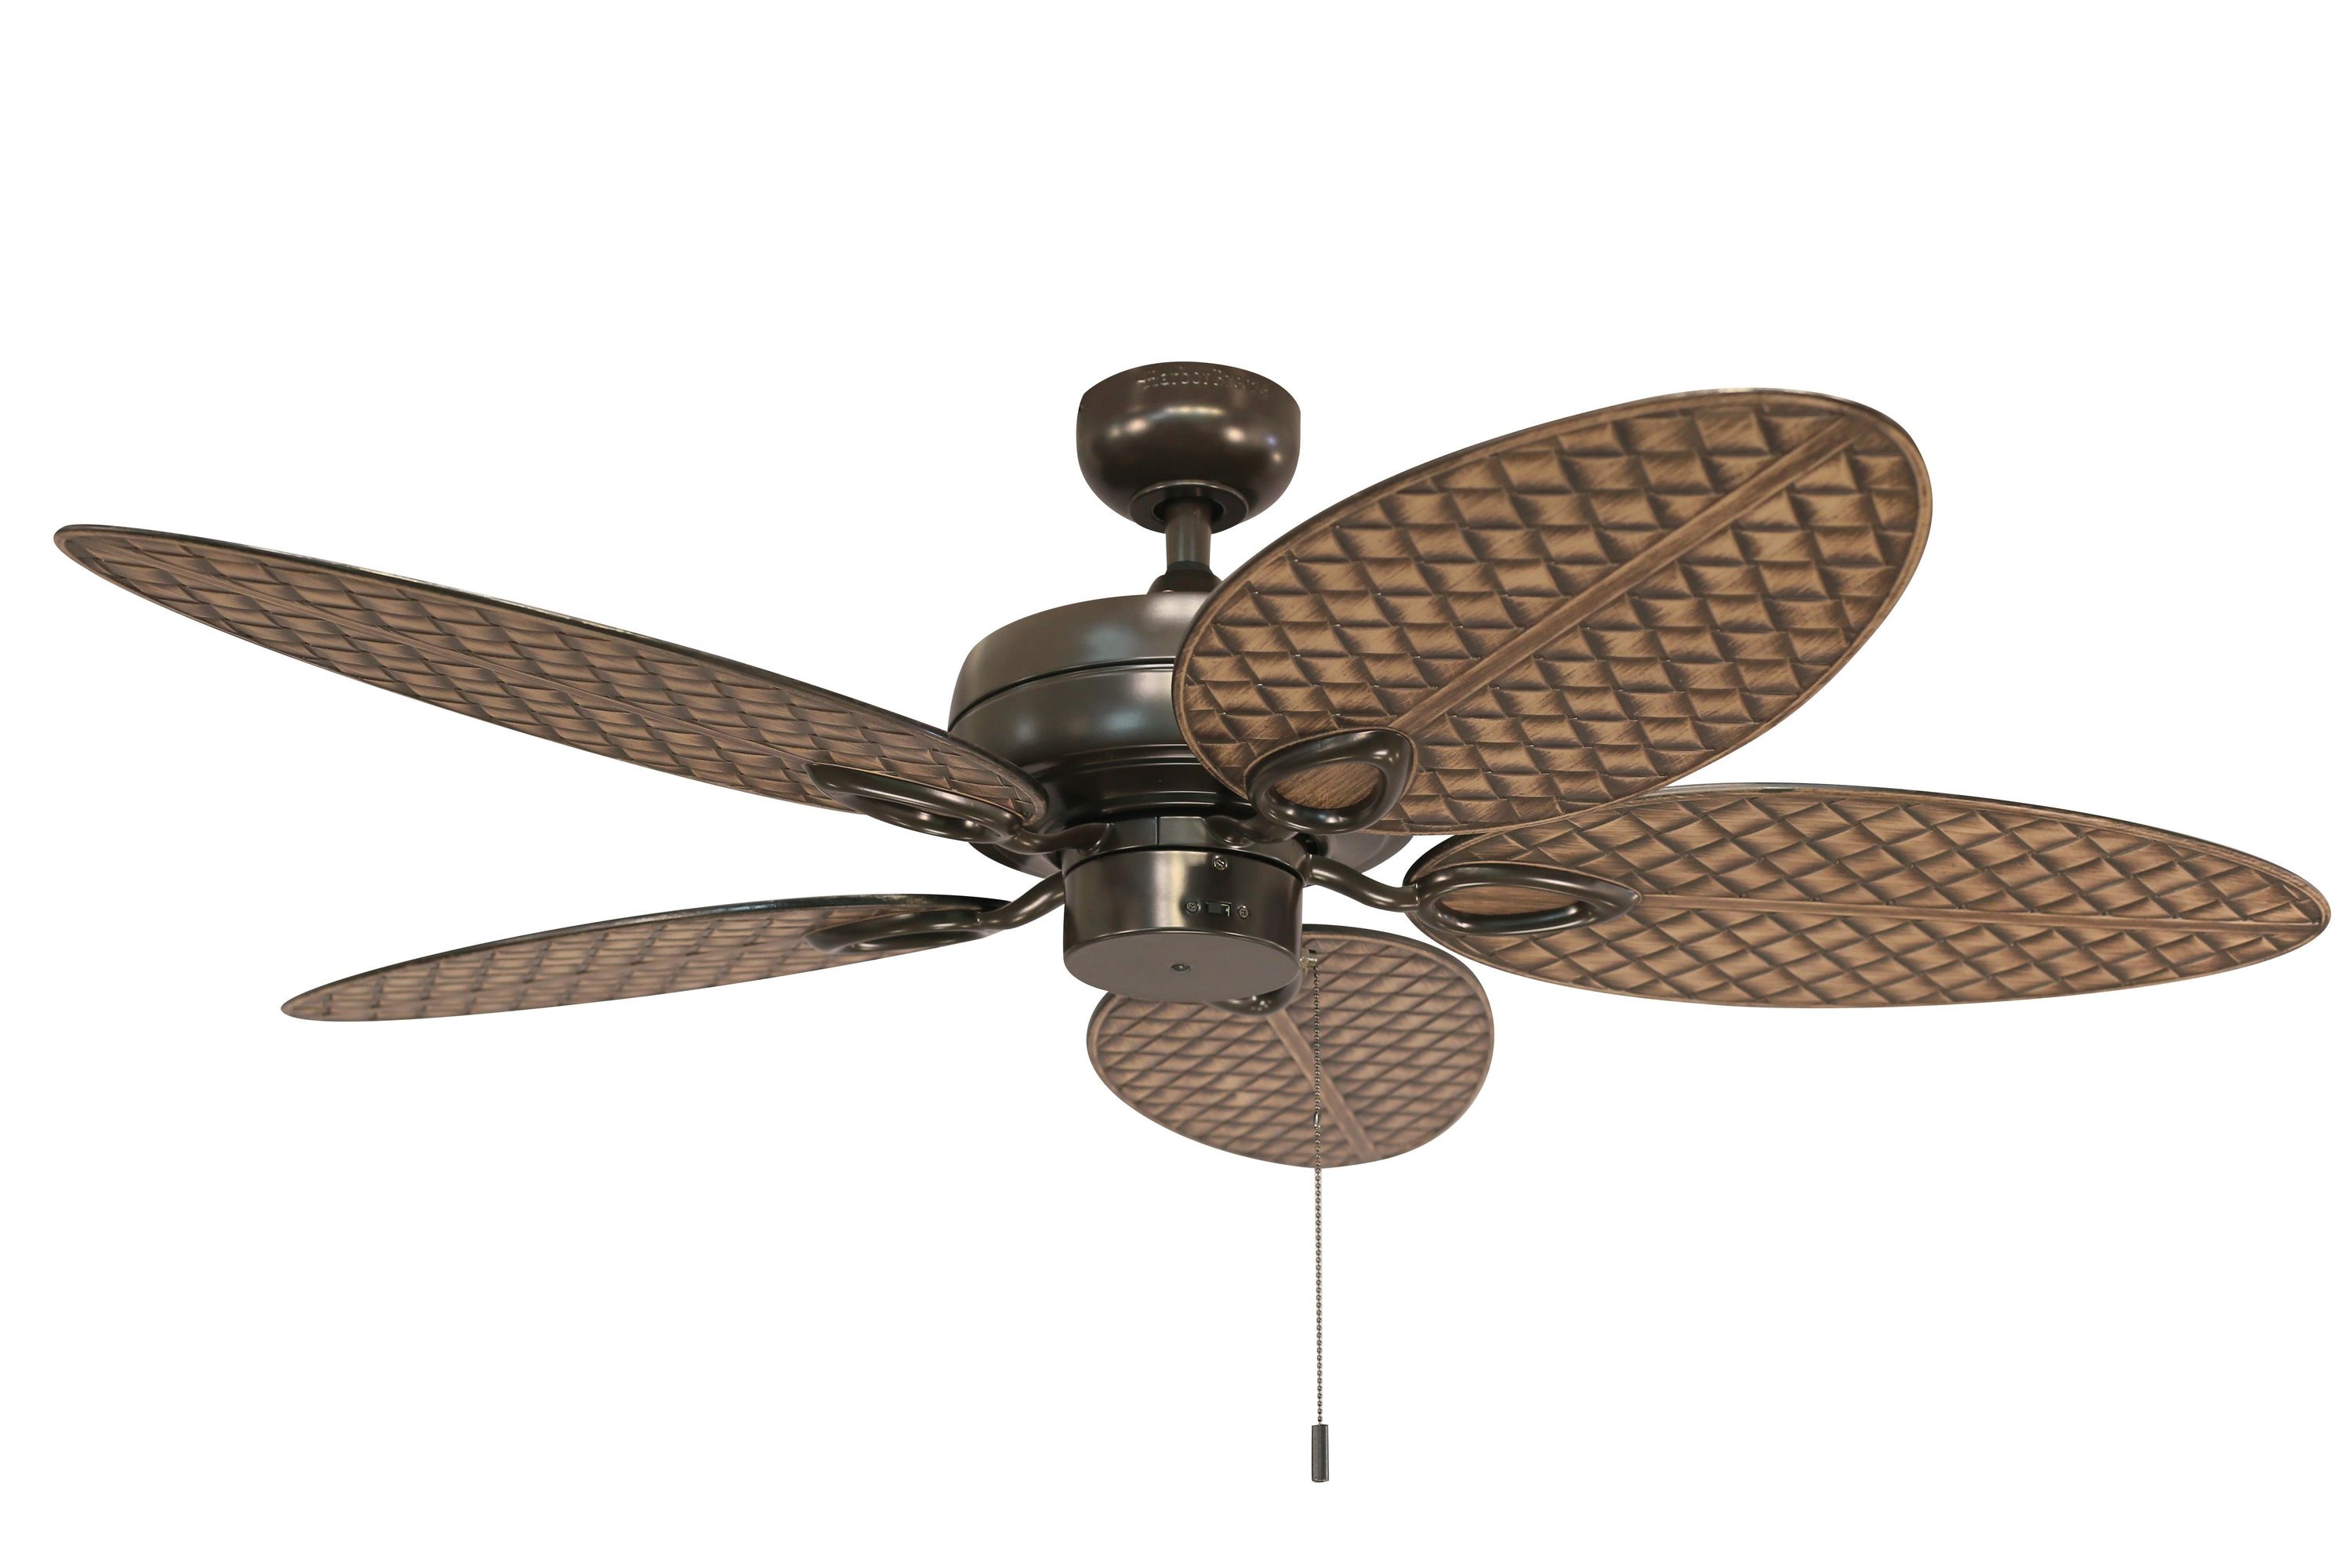 Downrod Or Flush Mount Ceiling Fan, Can You Flush Mount A Ceiling Fan With Downrod